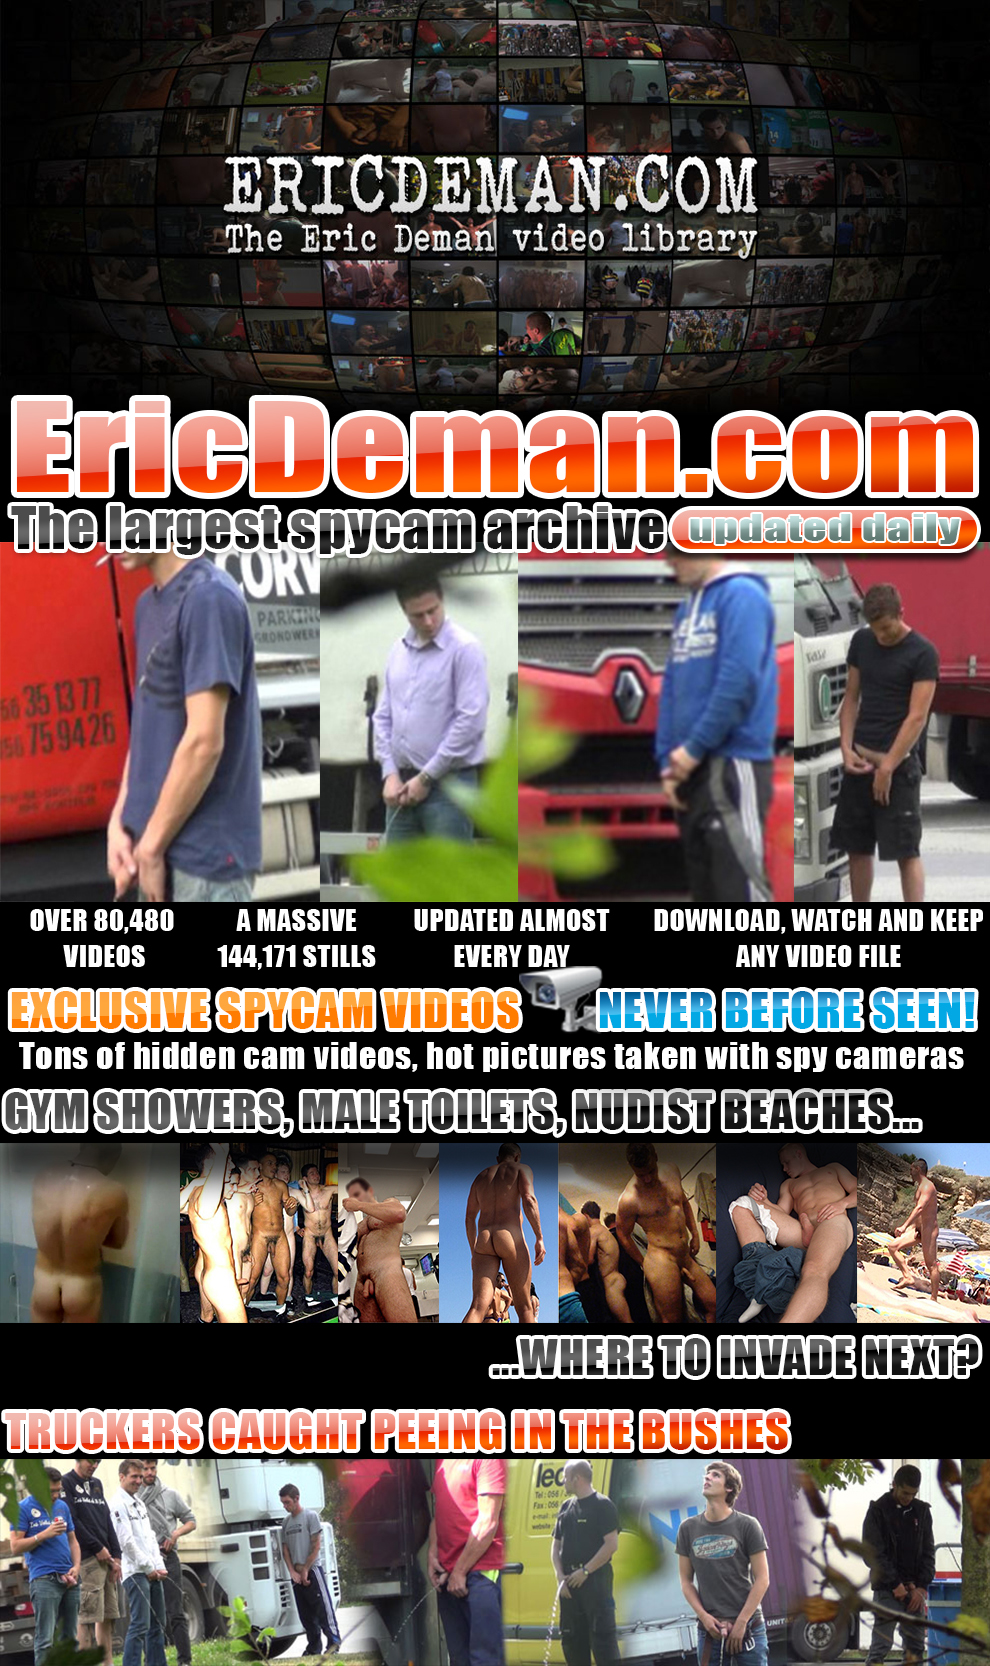 EricDeman, the largest spycam video library image